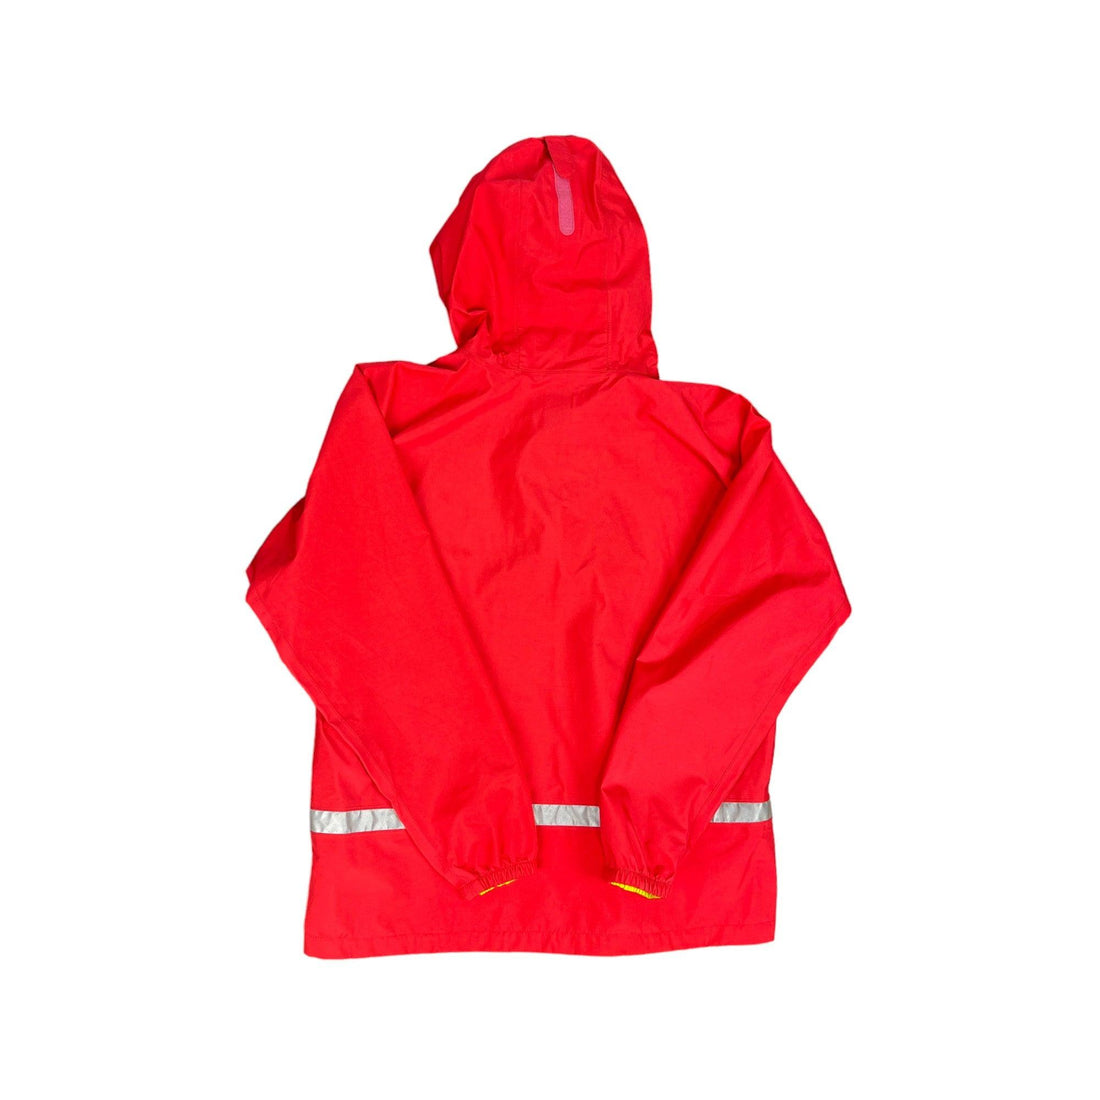 Vintage Red Montbell Jacket - Small - The Streetwear Studio